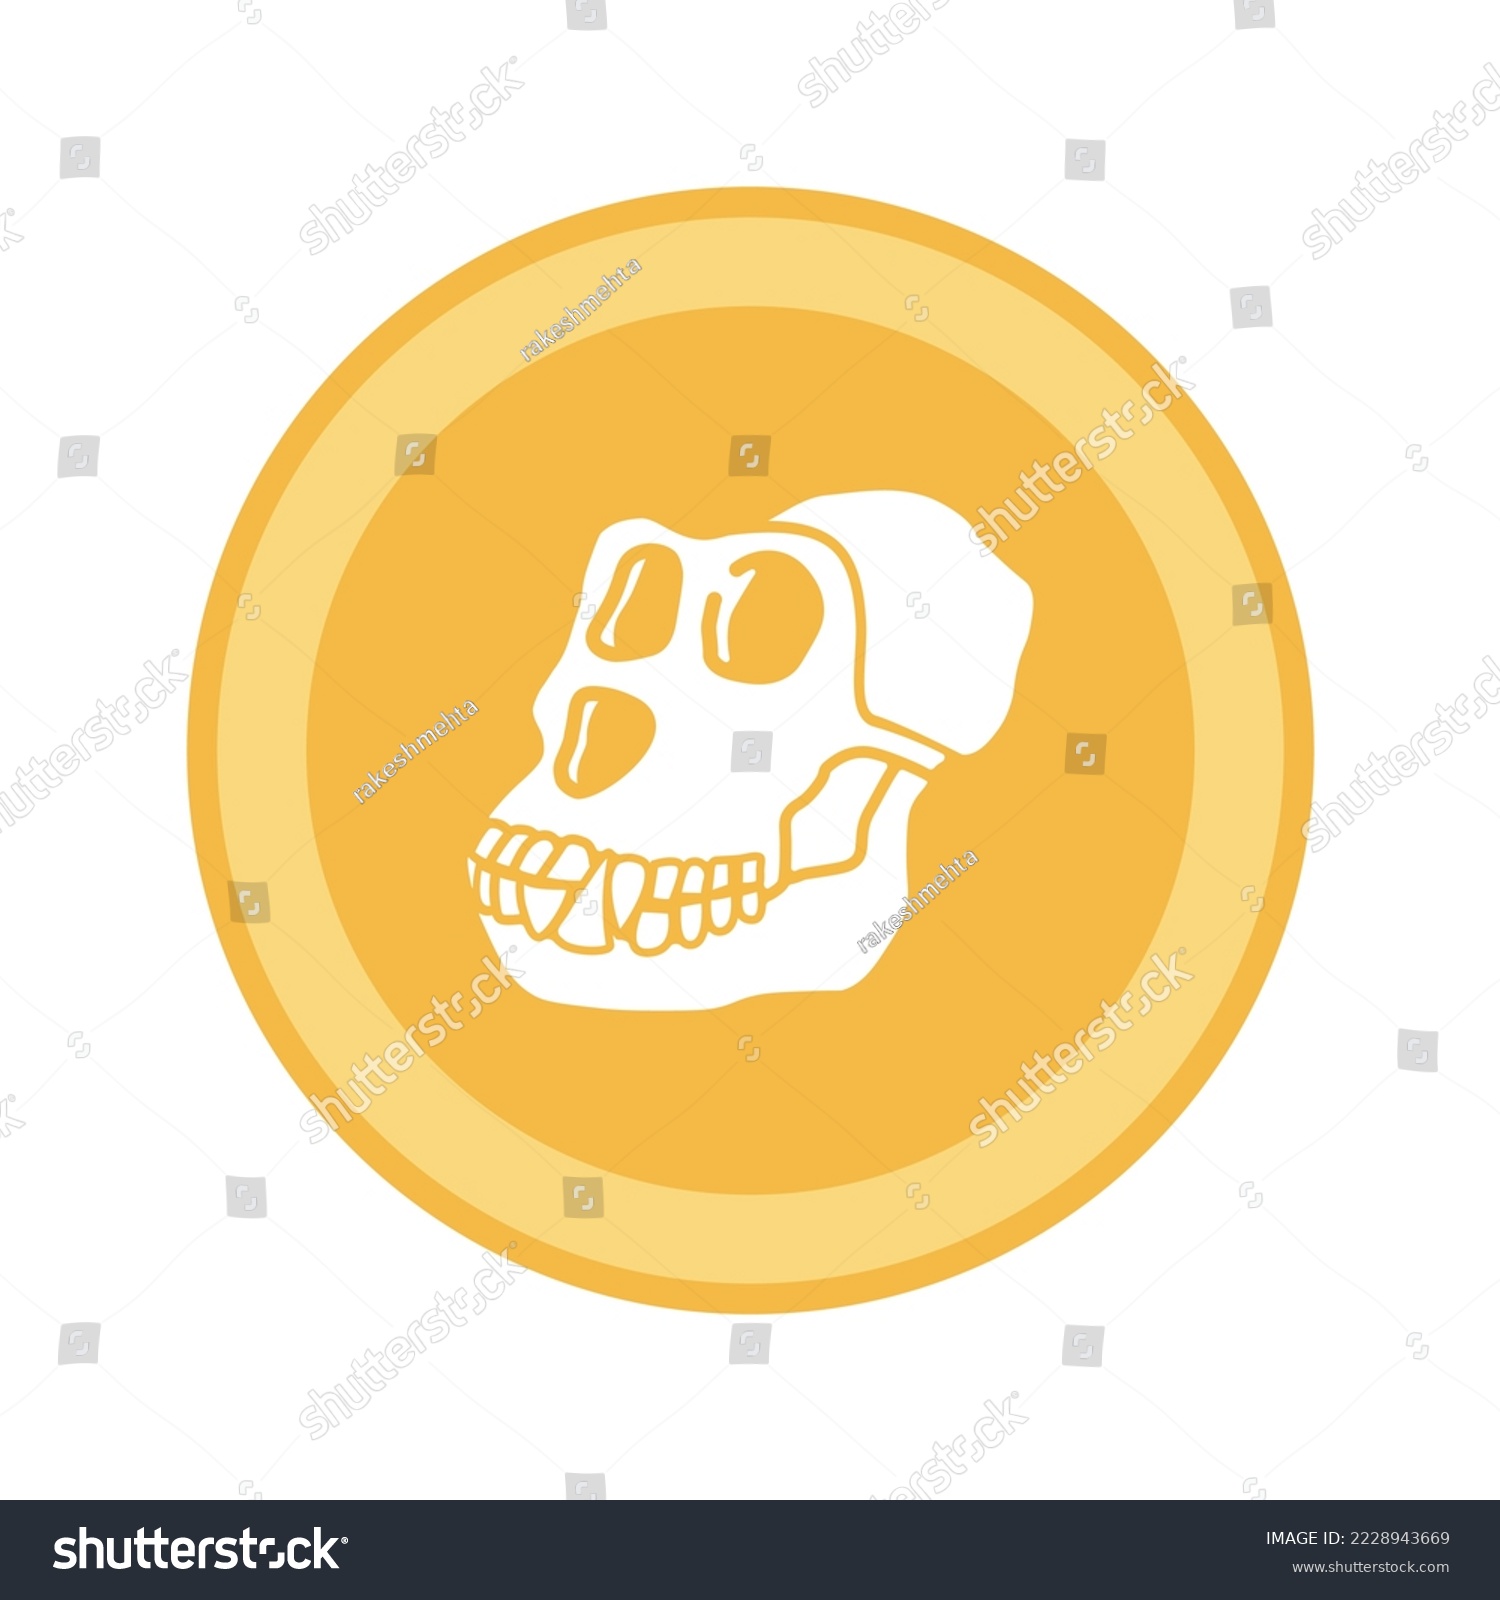 SVG of Ape Coin cryptocurrency golden coin isolated on white background vector illustration svg